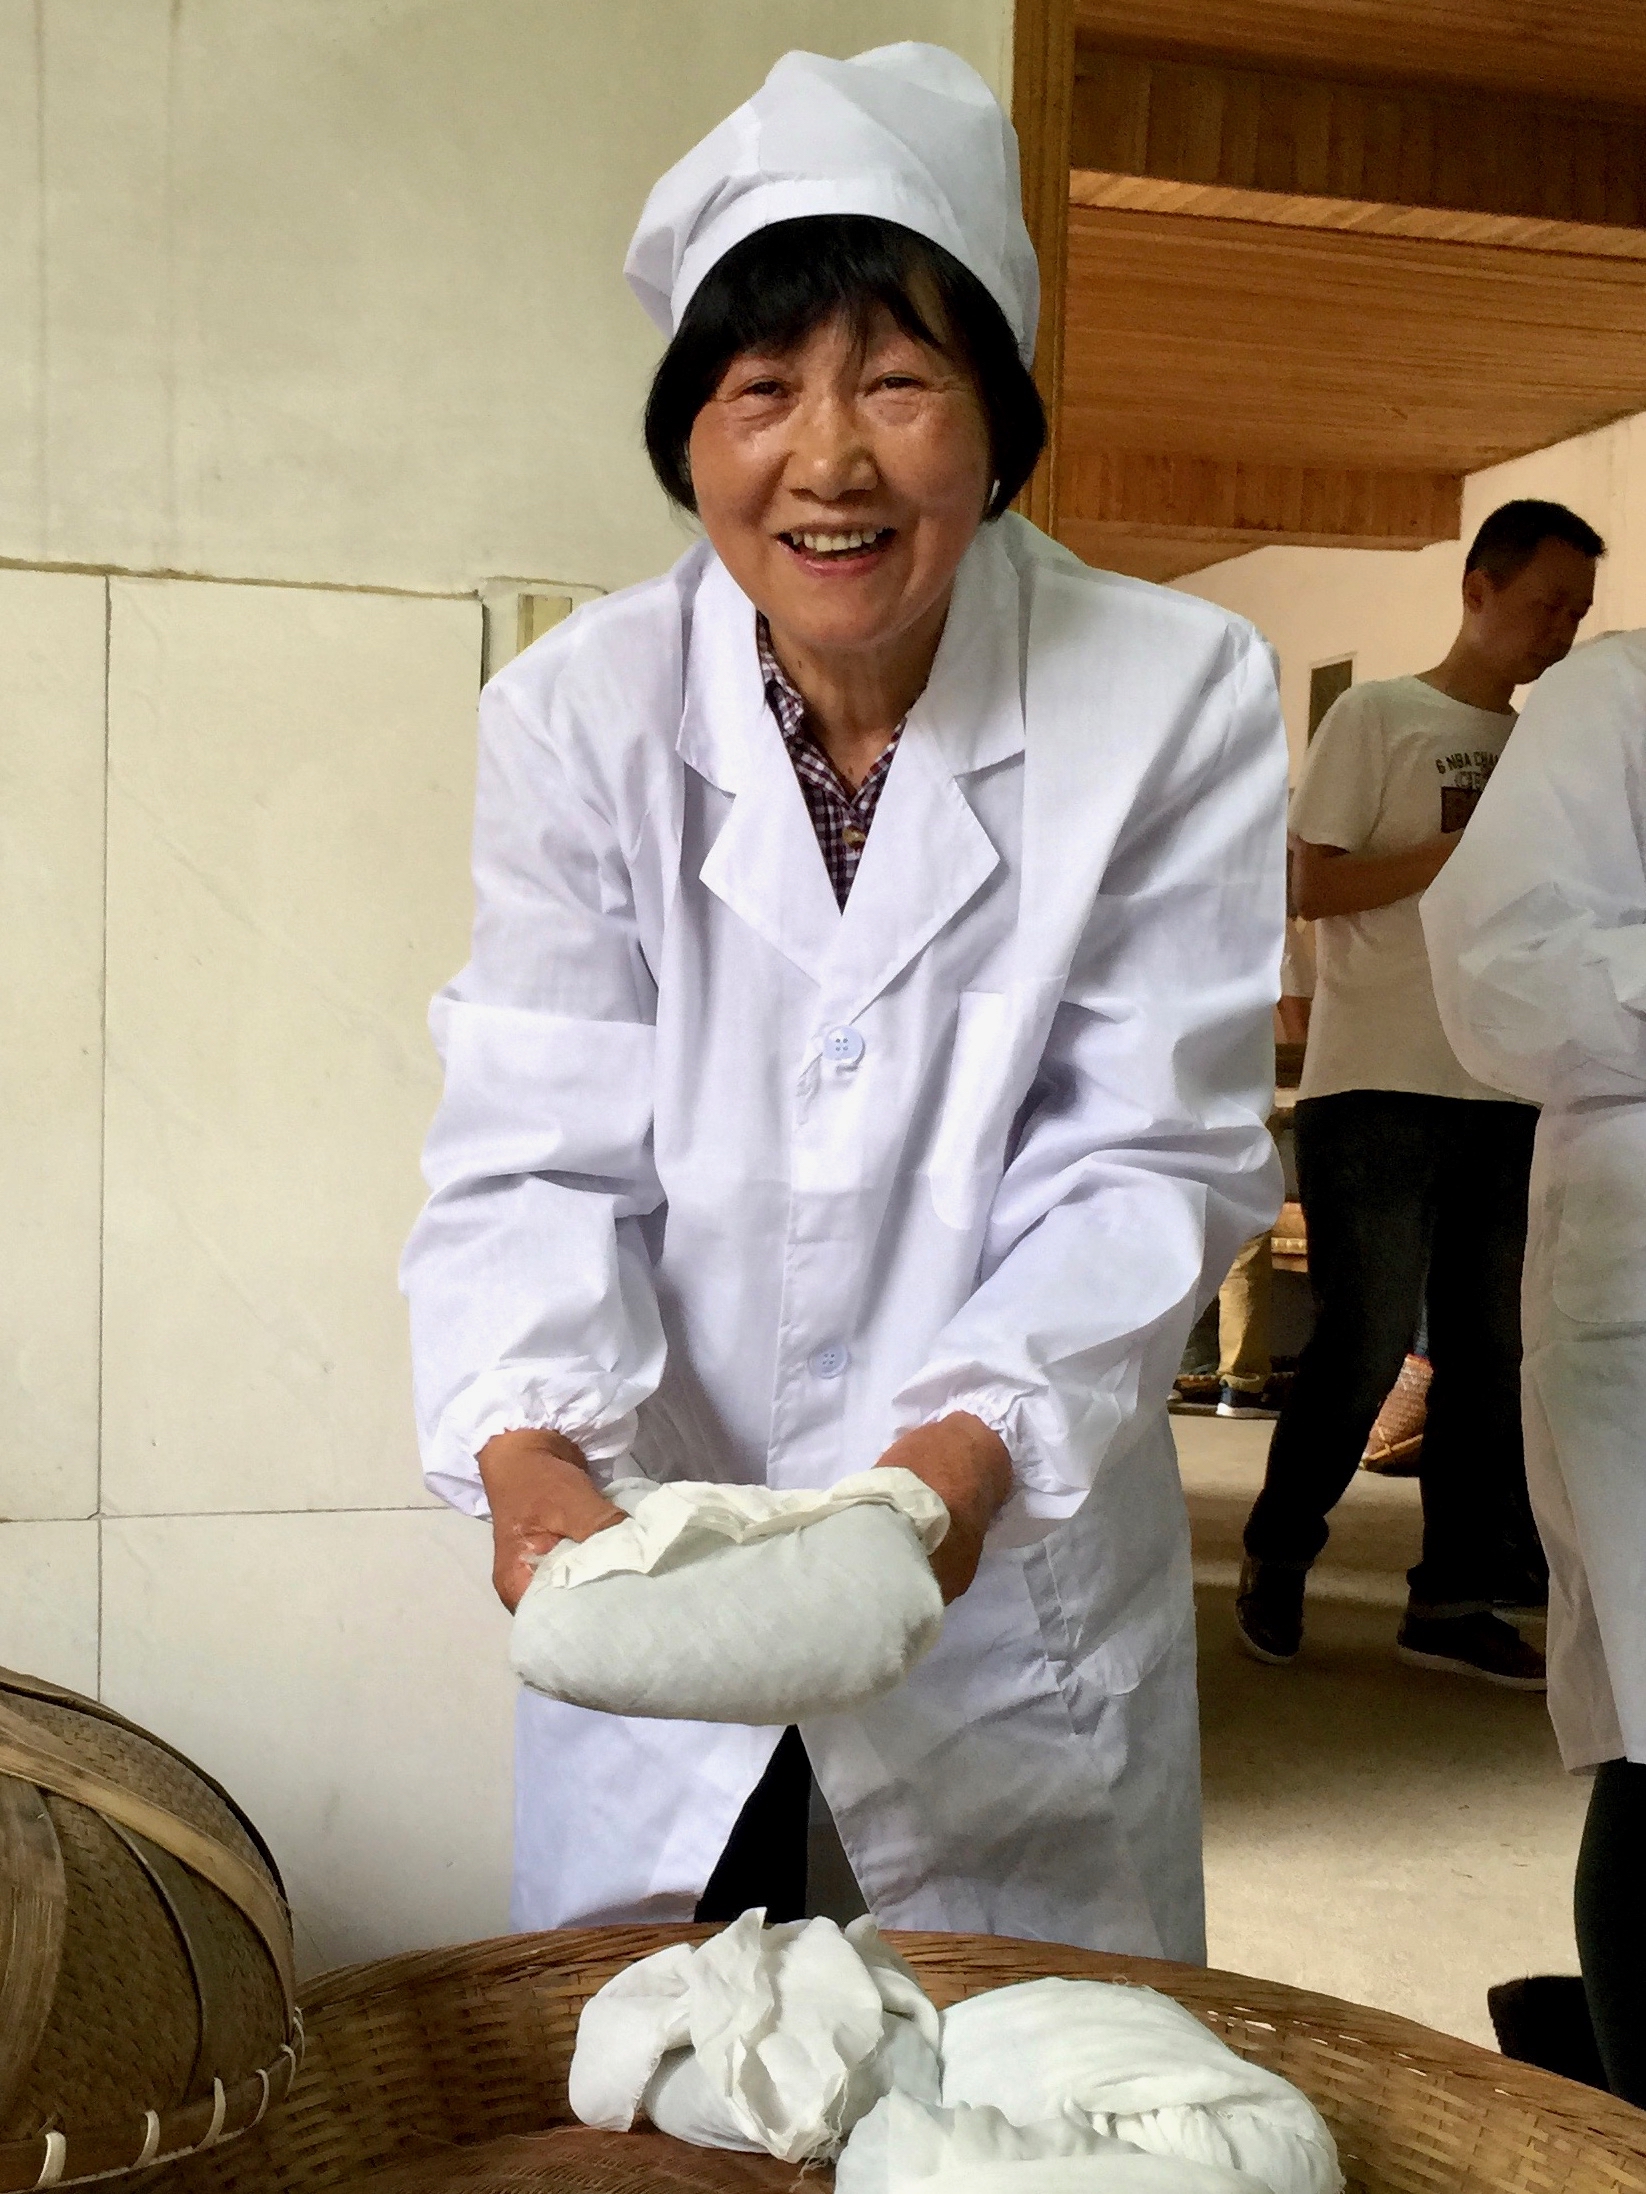 A smiling woman in a white coat and hat holding a small cloth-wrapped bundle in both hands.